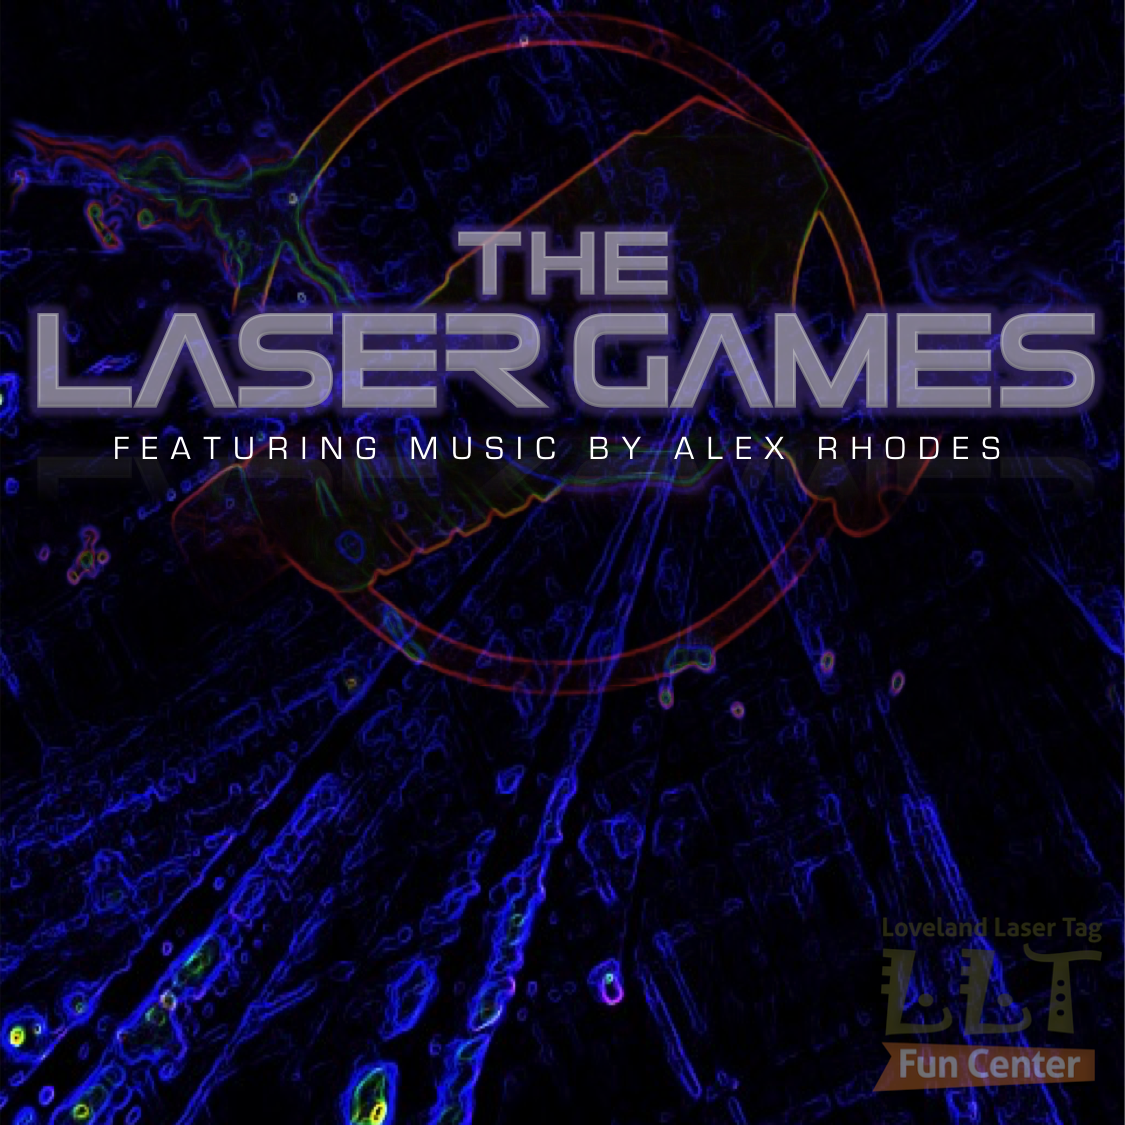 The Laser Games